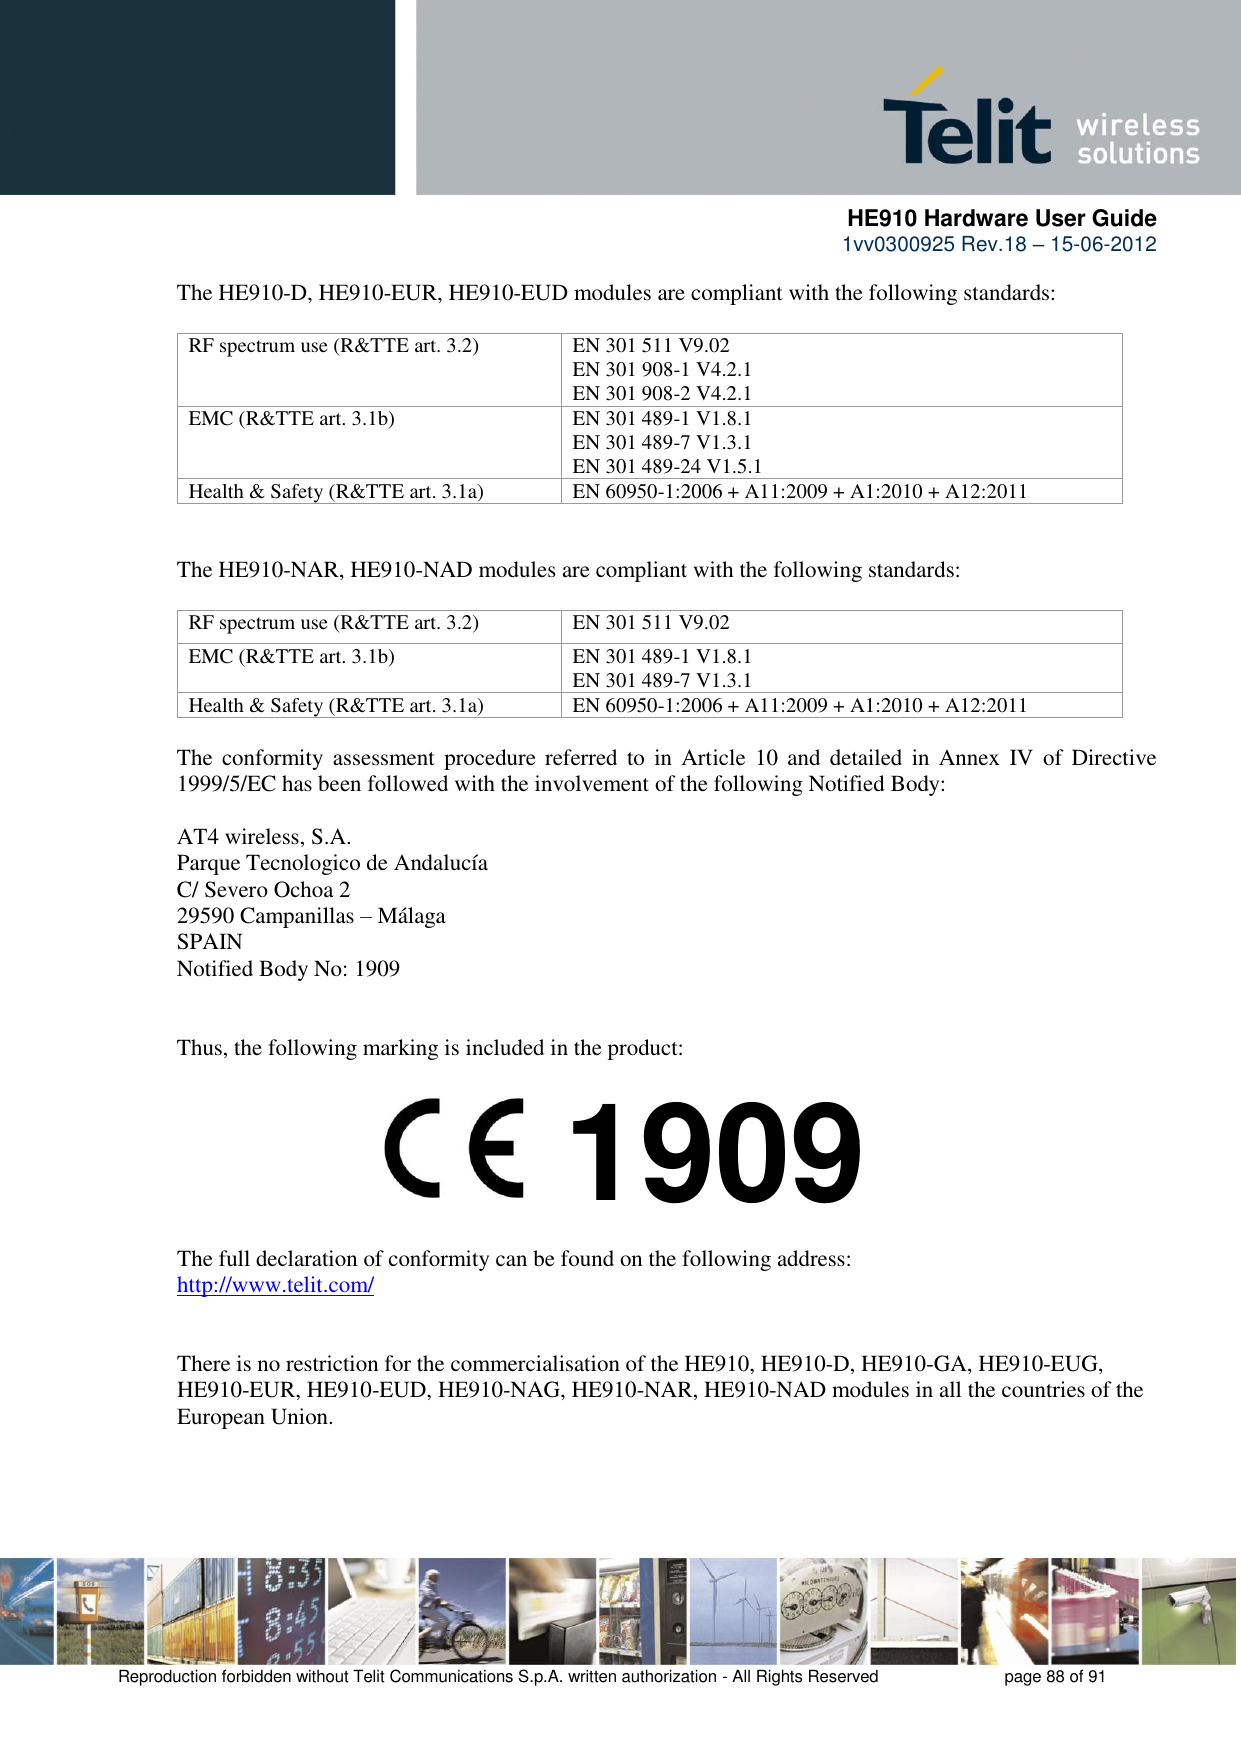      HE910 Hardware User Guide 1vv0300925 Rev.18 – 15-06-2012    Reproduction forbidden without Telit Communications S.p.A. written authorization - All Rights Reserved    page 88 of 91  The HE910-D, HE910-EUR, HE910-EUD modules are compliant with the following standards:  RF spectrum use (R&amp;TTE art. 3.2) EN 301 511 V9.02 EN 301 908-1 V4.2.1 EN 301 908-2 V4.2.1 EMC (R&amp;TTE art. 3.1b) EN 301 489-1 V1.8.1 EN 301 489-7 V1.3.1 EN 301 489-24 V1.5.1 Health &amp; Safety (R&amp;TTE art. 3.1a) EN 60950-1:2006 + A11:2009 + A1:2010 + A12:2011   The HE910-NAR, HE910-NAD modules are compliant with the following standards:  RF spectrum use (R&amp;TTE art. 3.2) EN 301 511 V9.02 EMC (R&amp;TTE art. 3.1b) EN 301 489-1 V1.8.1 EN 301 489-7 V1.3.1 Health &amp; Safety (R&amp;TTE art. 3.1a) EN 60950-1:2006 + A11:2009 + A1:2010 + A12:2011  The  conformity assessment  procedure  referred  to  in Article  10  and  detailed  in  Annex  IV  of  Directive 1999/5/EC has been followed with the involvement of the following Notified Body:  AT4 wireless, S.A. Parque Tecnologico de Andalucía C/ Severo Ochoa 2 29590 Campanillas – Málaga SPAIN Notified Body No: 1909   Thus, the following marking is included in the product:        The full declaration of conformity can be found on the following address: http://www.telit.com/   There is no restriction for the commercialisation of the HE910, HE910-D, HE910-GA, HE910-EUG, HE910-EUR, HE910-EUD, HE910-NAG, HE910-NAR, HE910-NAD modules in all the countries of the European Union.  1909 